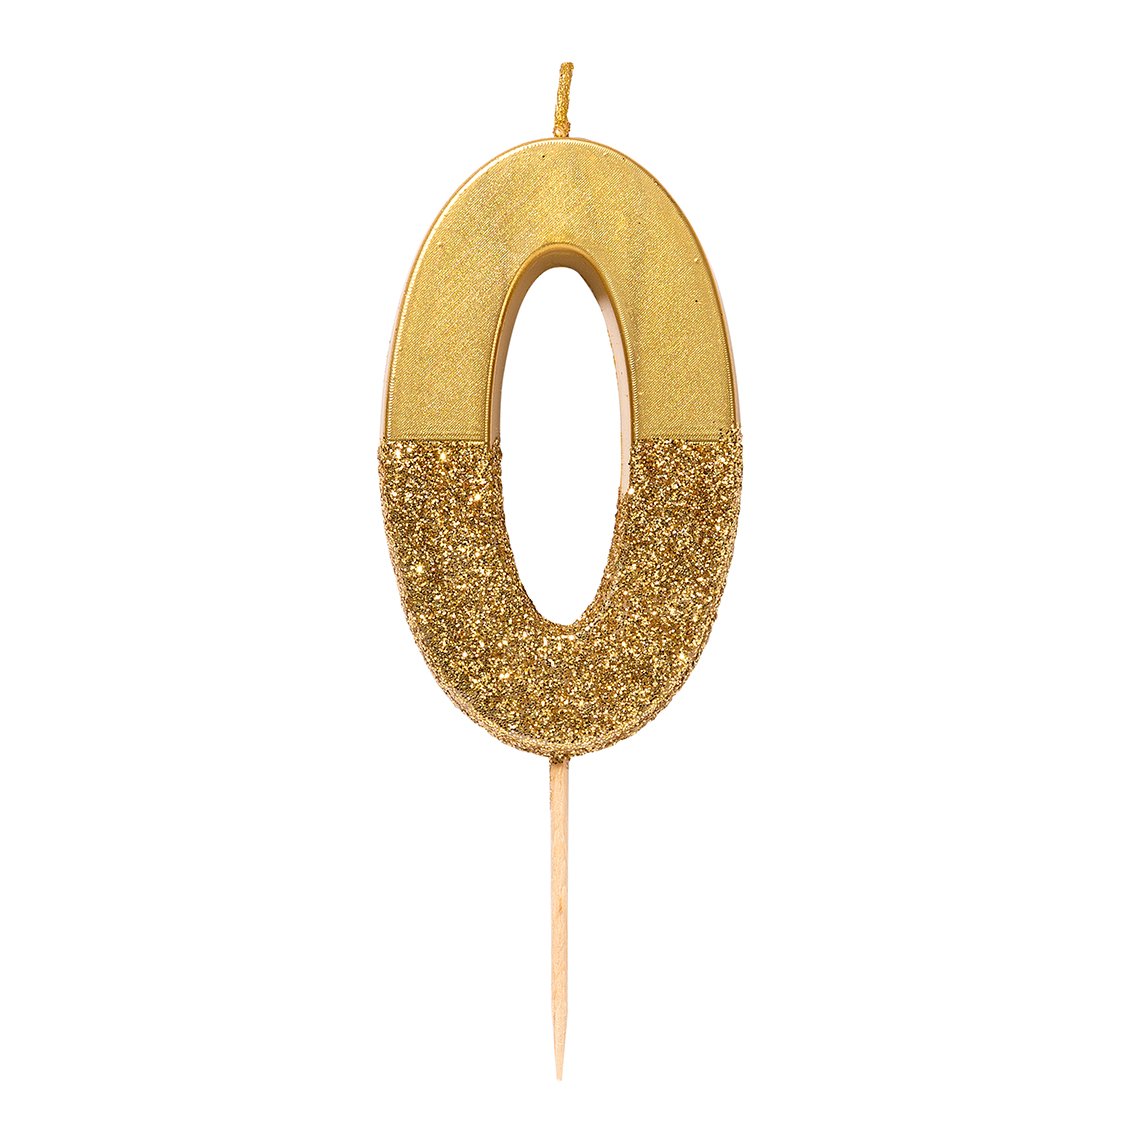 Gold Glitter Number Candle - Penny Black